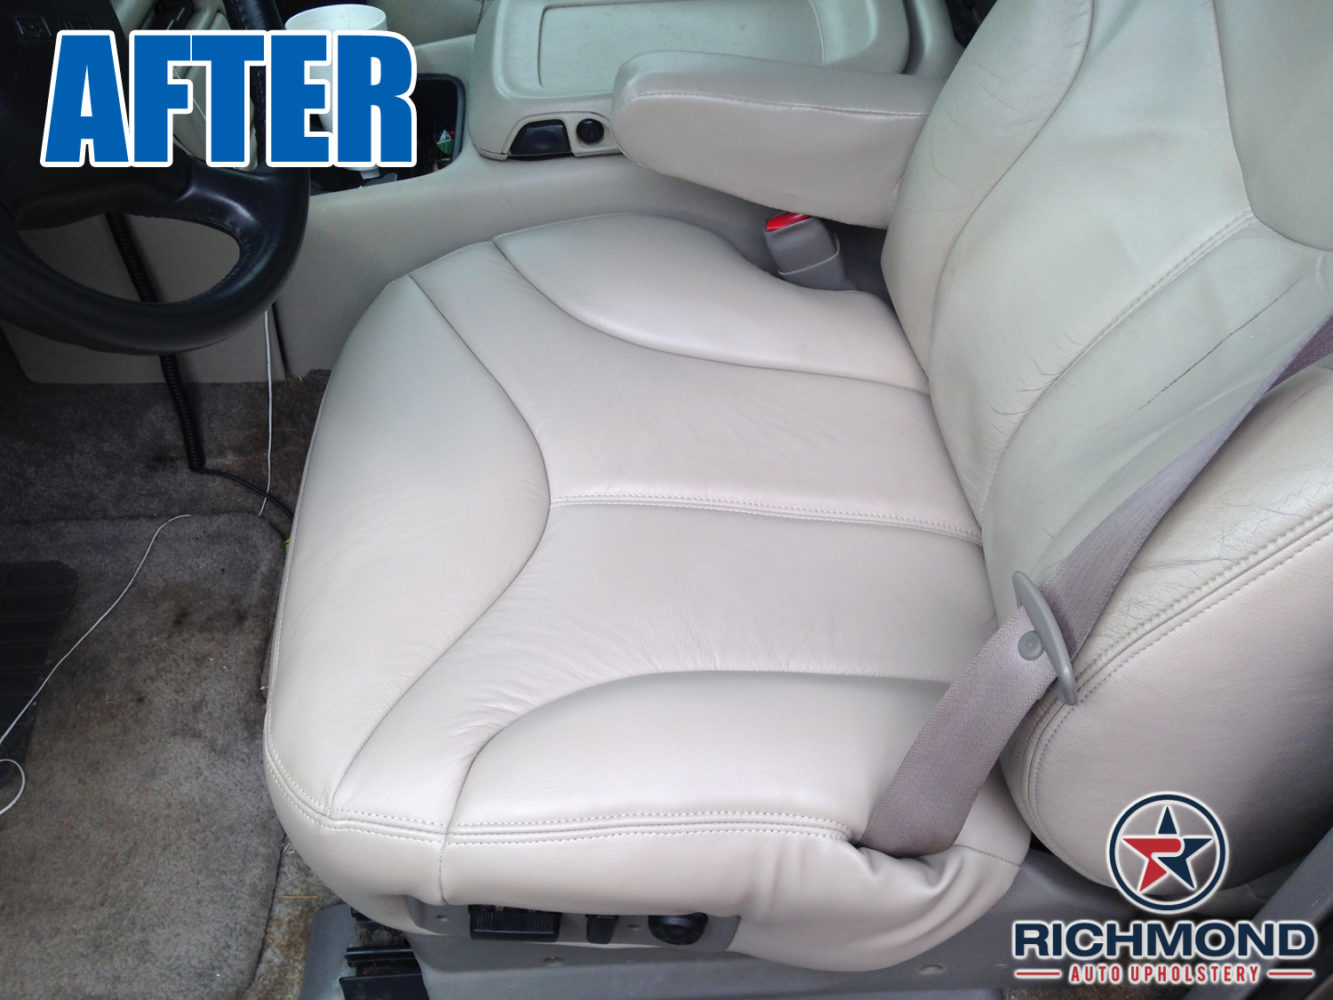 2000-2002 GMC Yukon & Yukon XL SLT SLE Replacement Leather Seat Cover:  Driver Side Complete, Tan